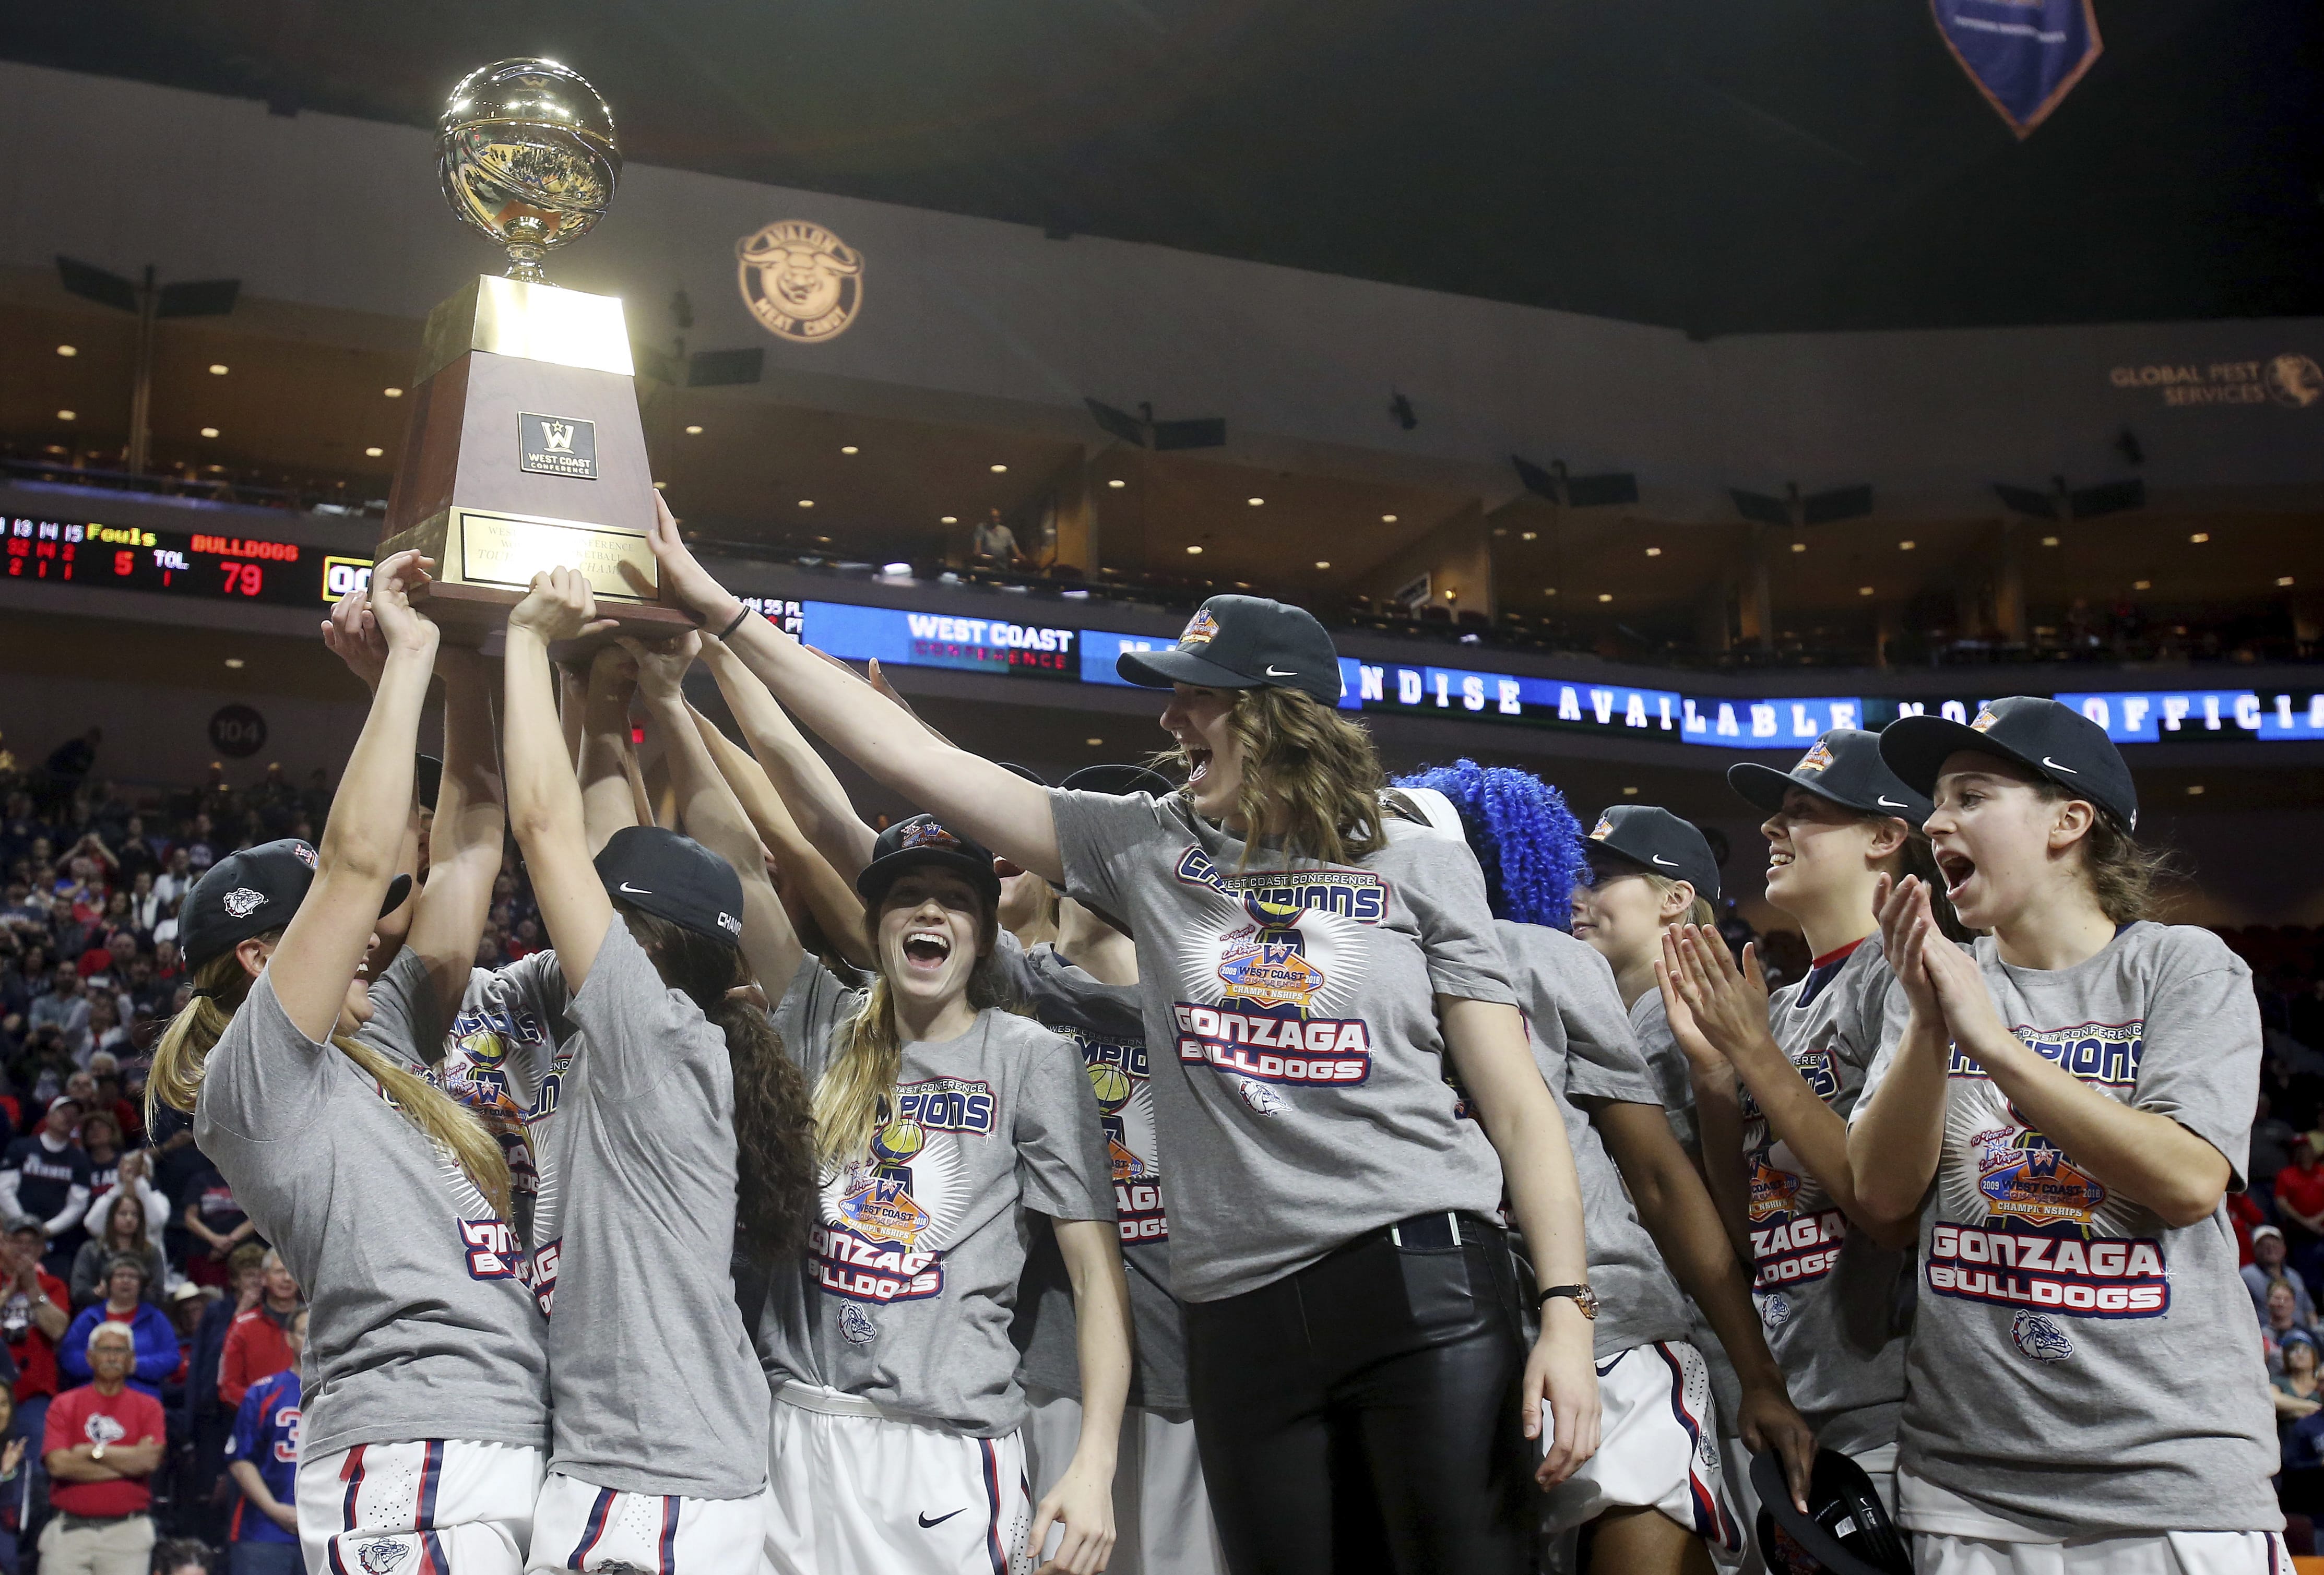 Gonzaga celebrates after winning the West Coast Conference tournament championship NCAA women's college basketball game against San Diego Tuesday, March 6, 2018, in Las Vegas. Gonzaga defeated San Diego 79-71.